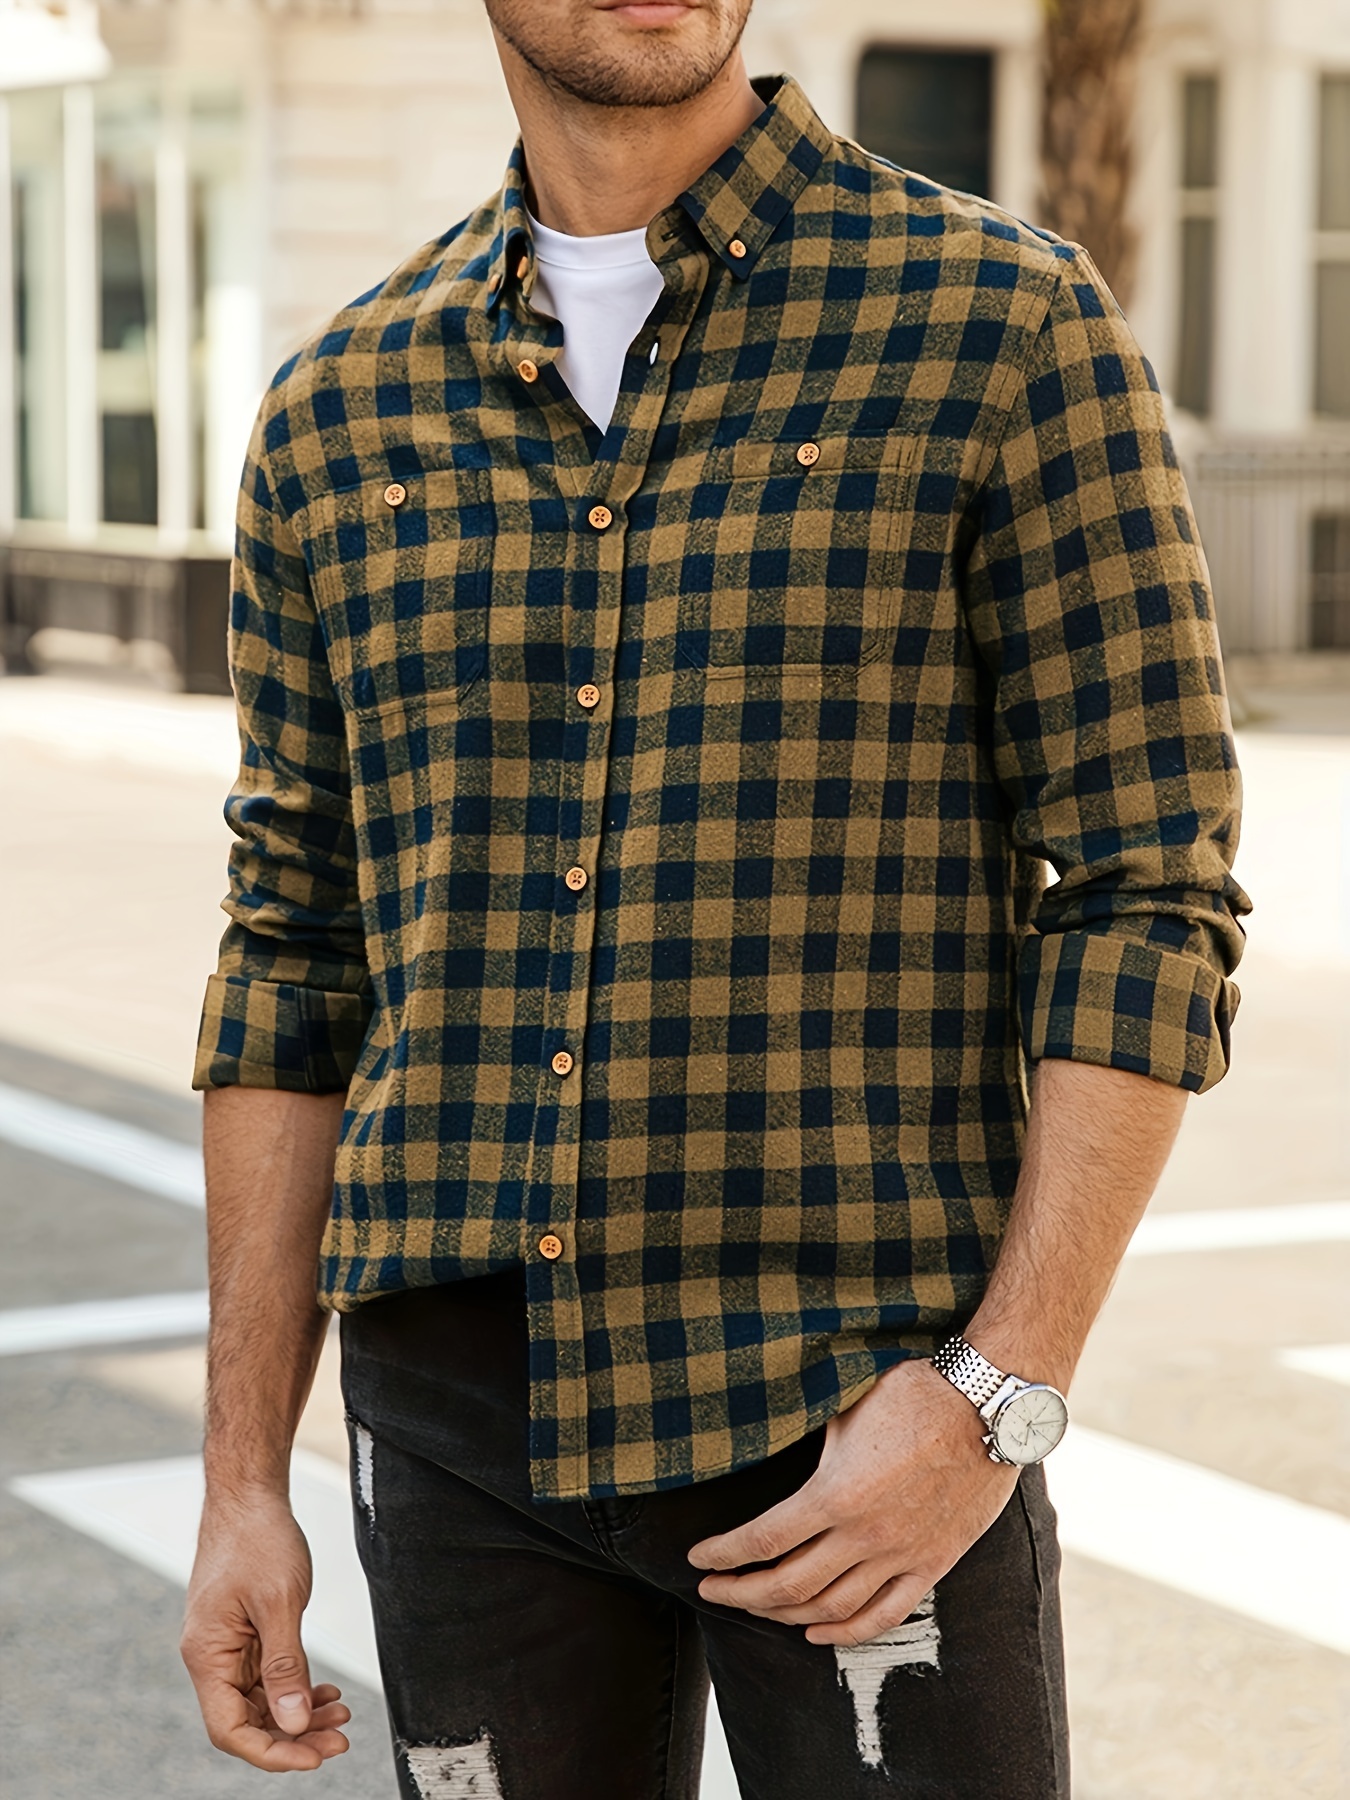 Plaid Print Men's Casual Button Up Long Sleeve Shirt, Men's Clothes For  Spring Summer Autumn, Tops For Men